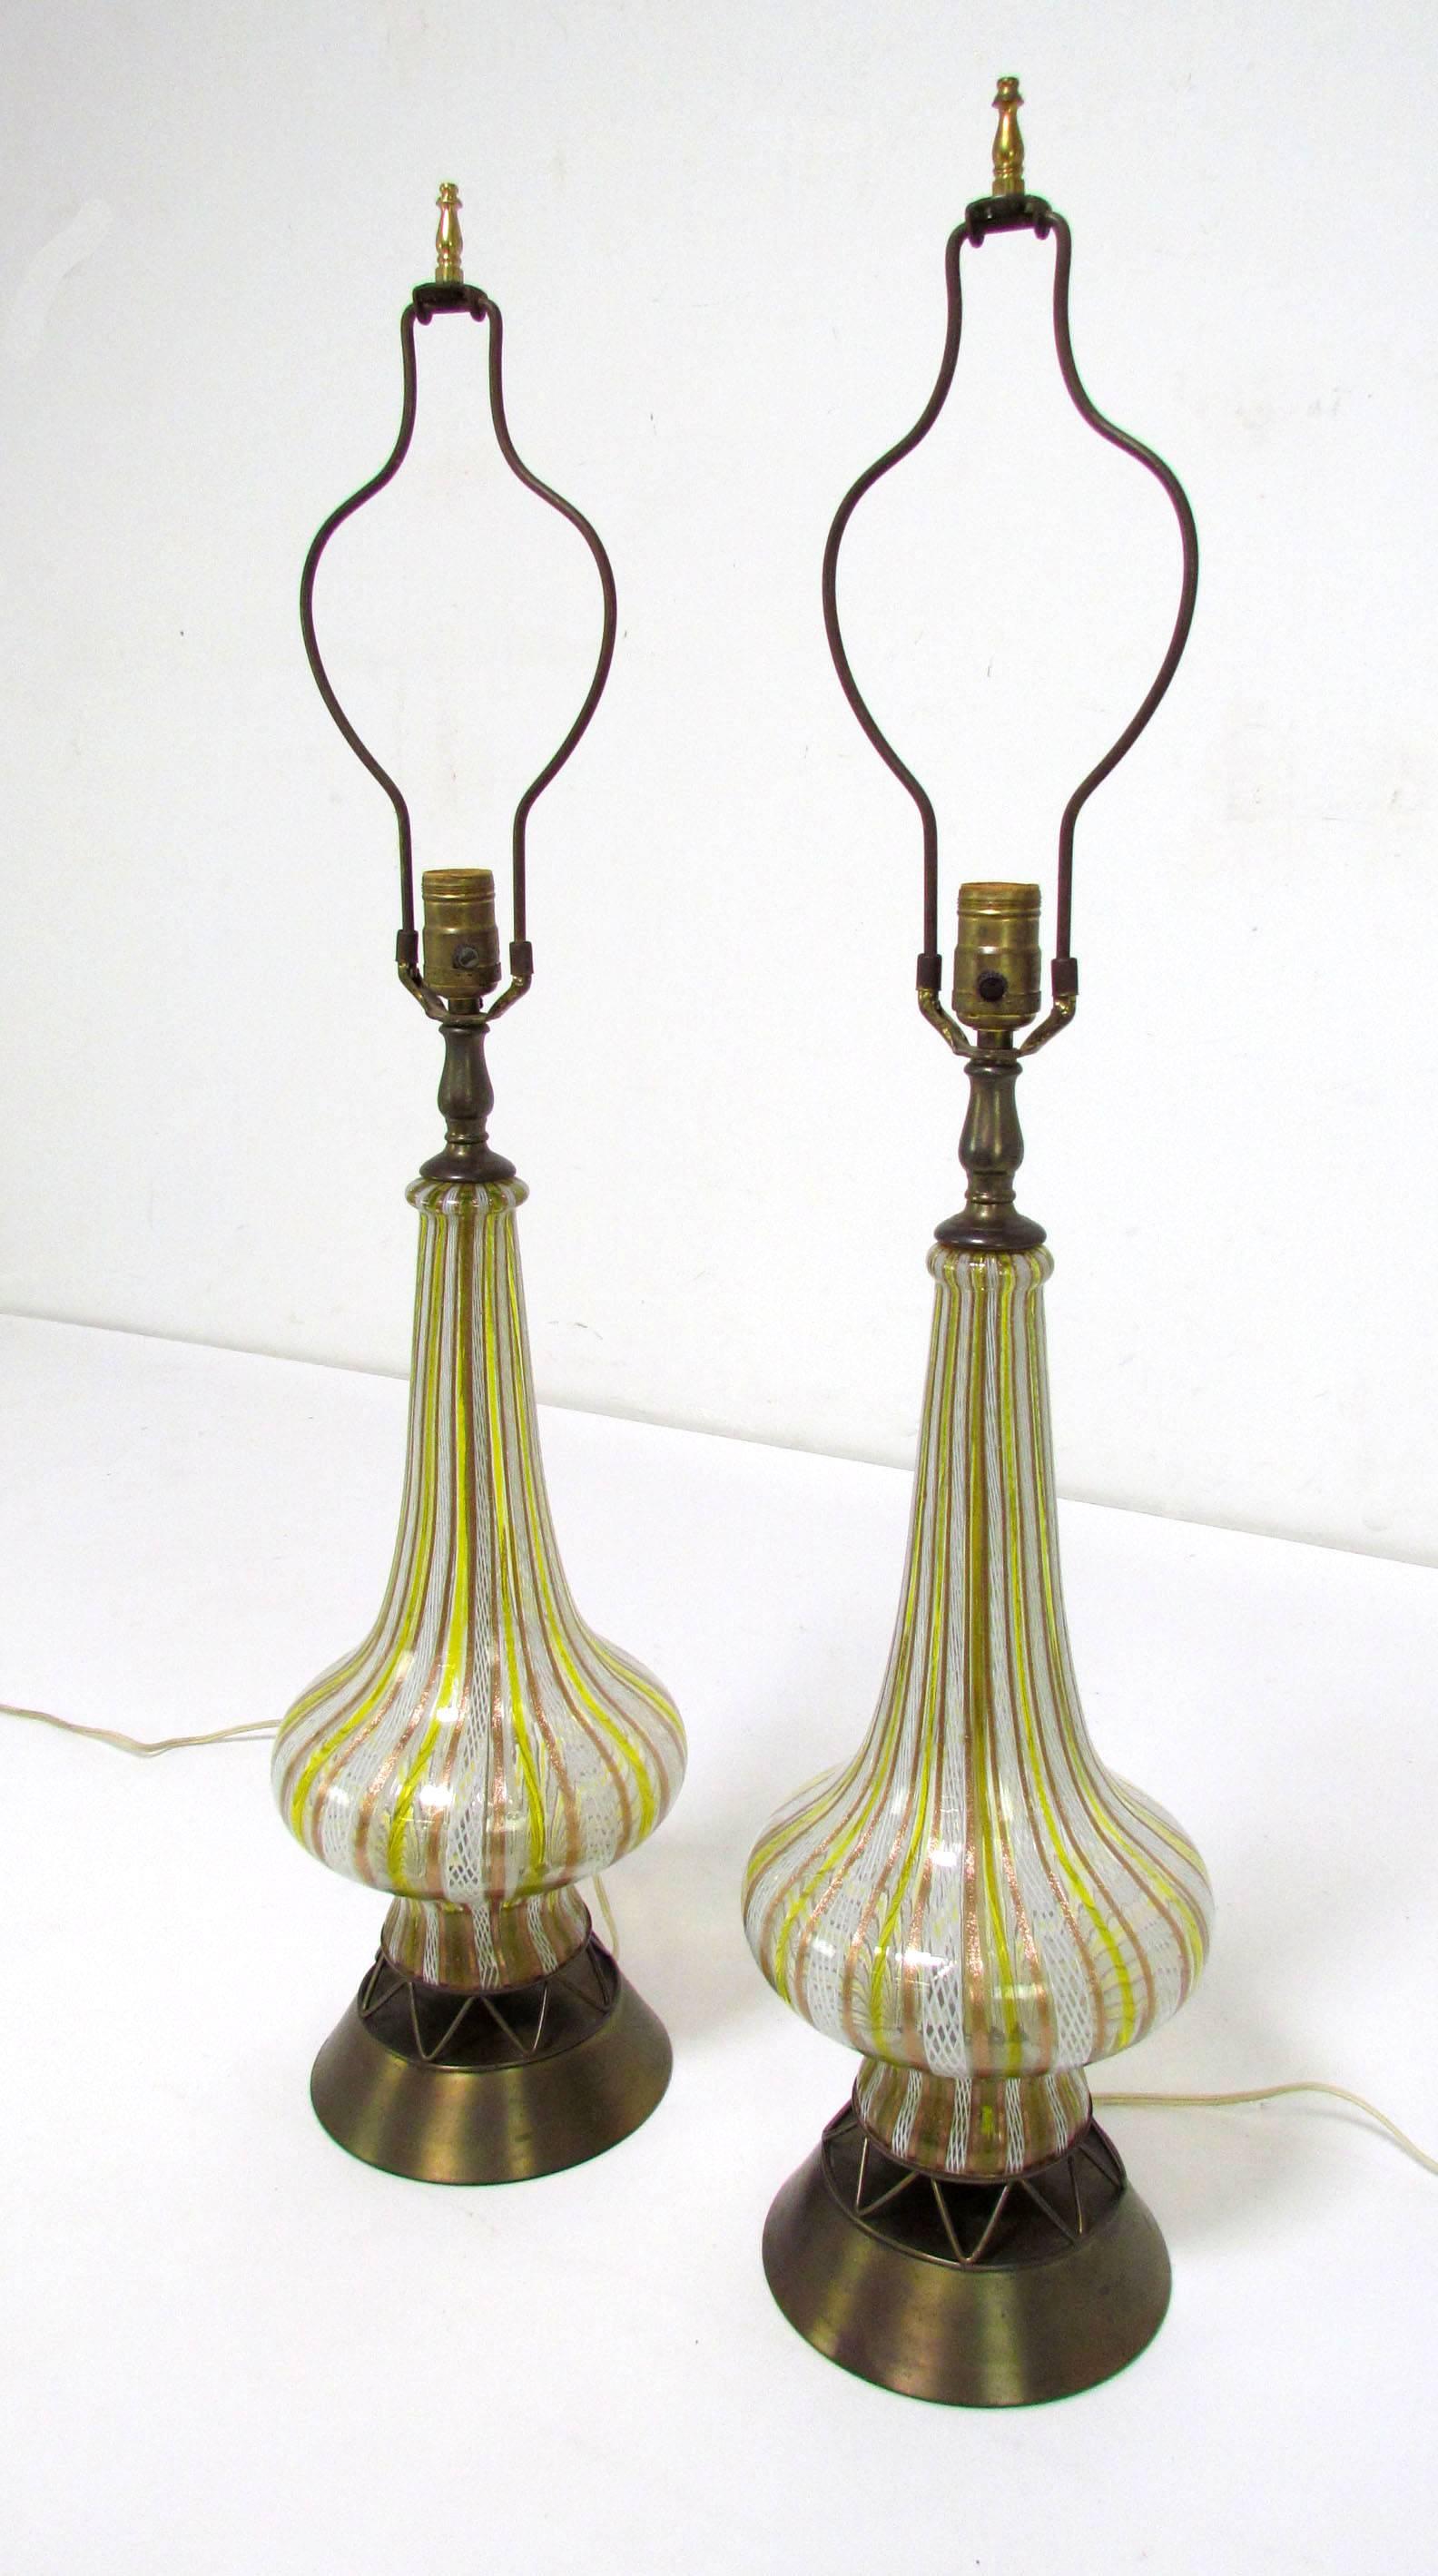 Pair of bottle form Murano glass lamps with zanfirico and latticino decoration, original period mountings, circa 1950s.

Measures: 35.5